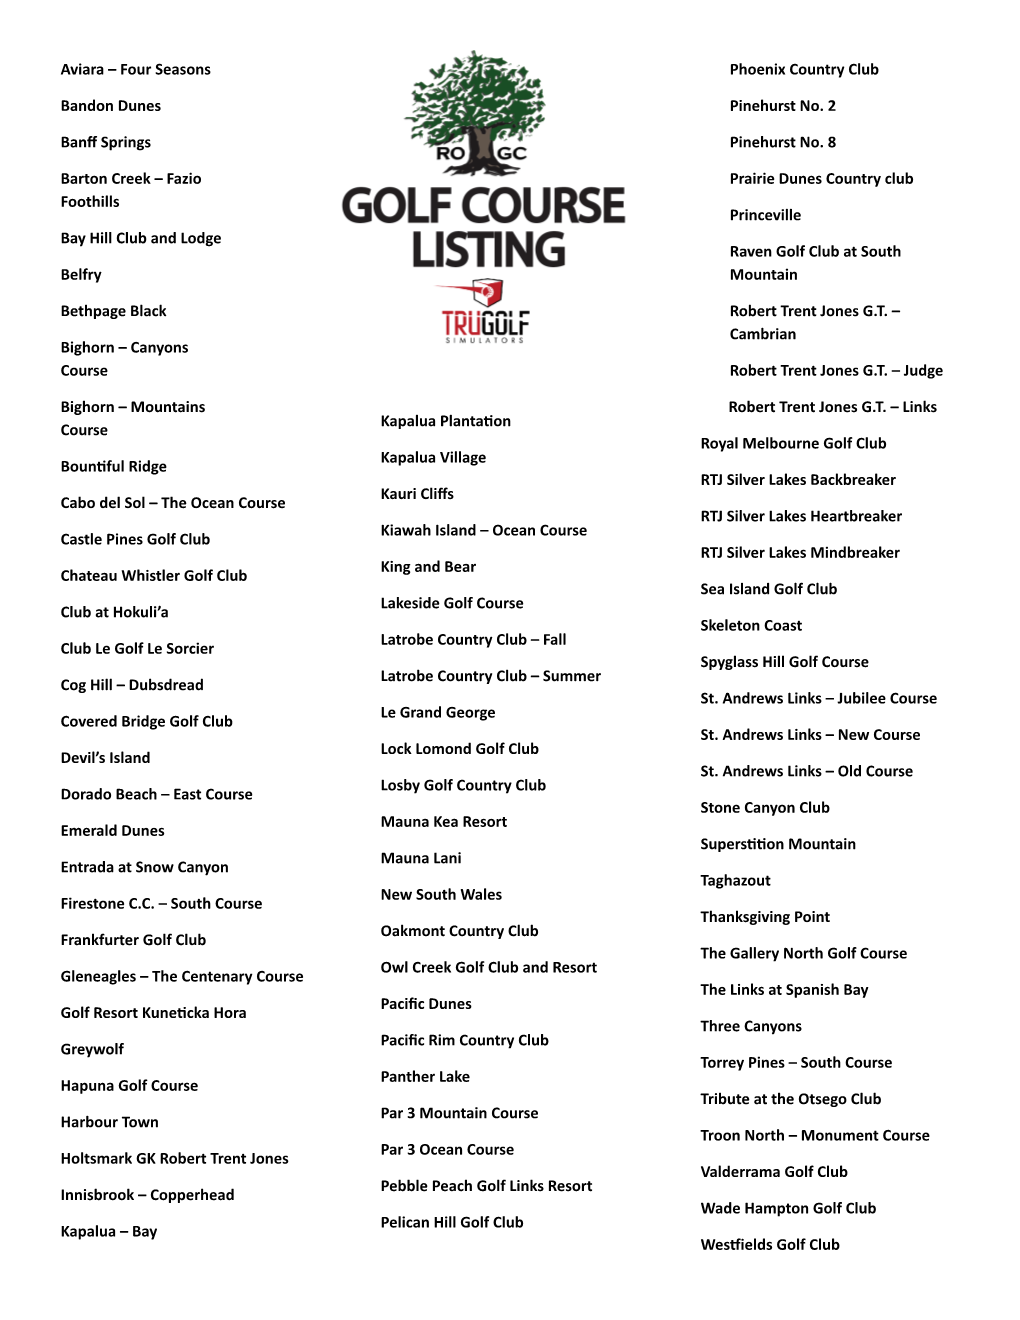 Golf Course Listing